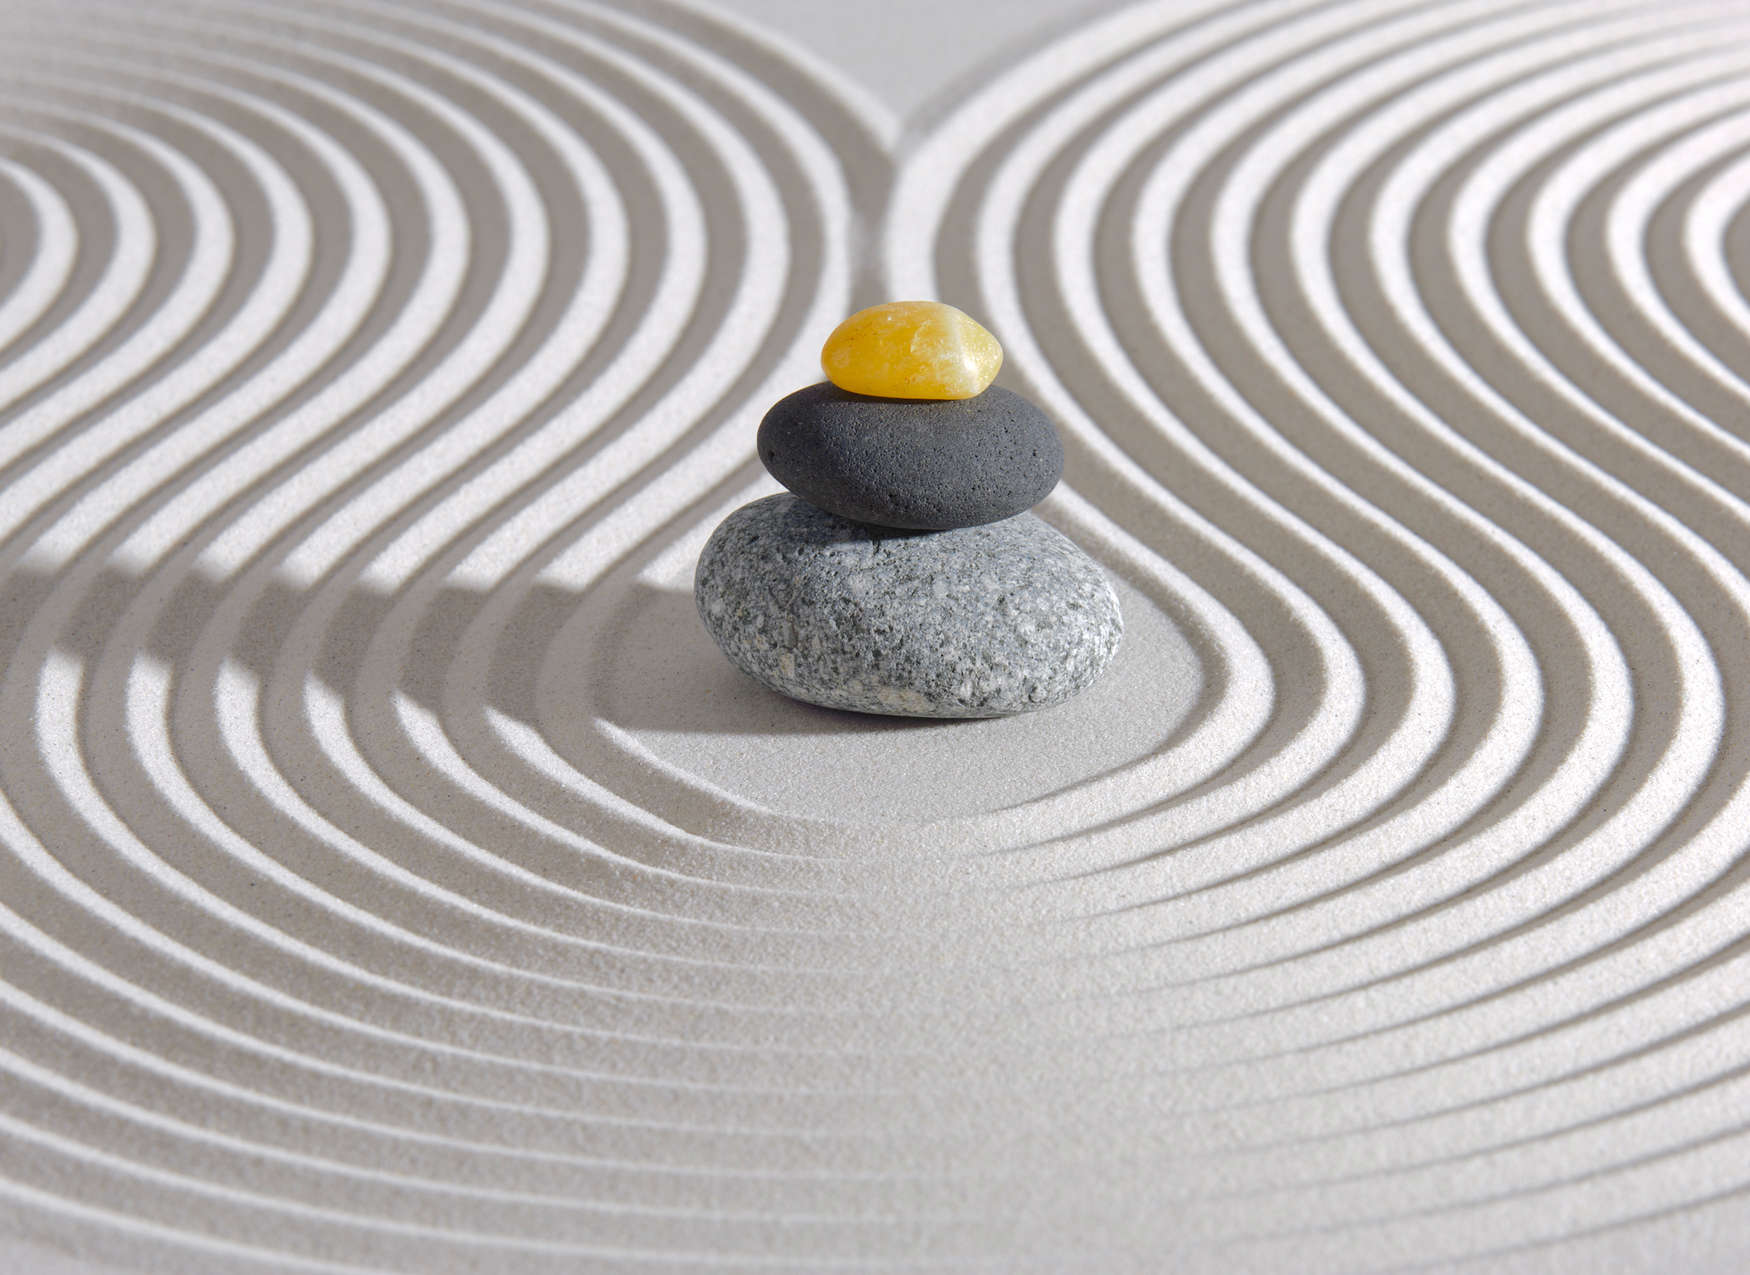             Spa stone tower in the sand photo wallpaper - Yellow, Grey, Beige
        